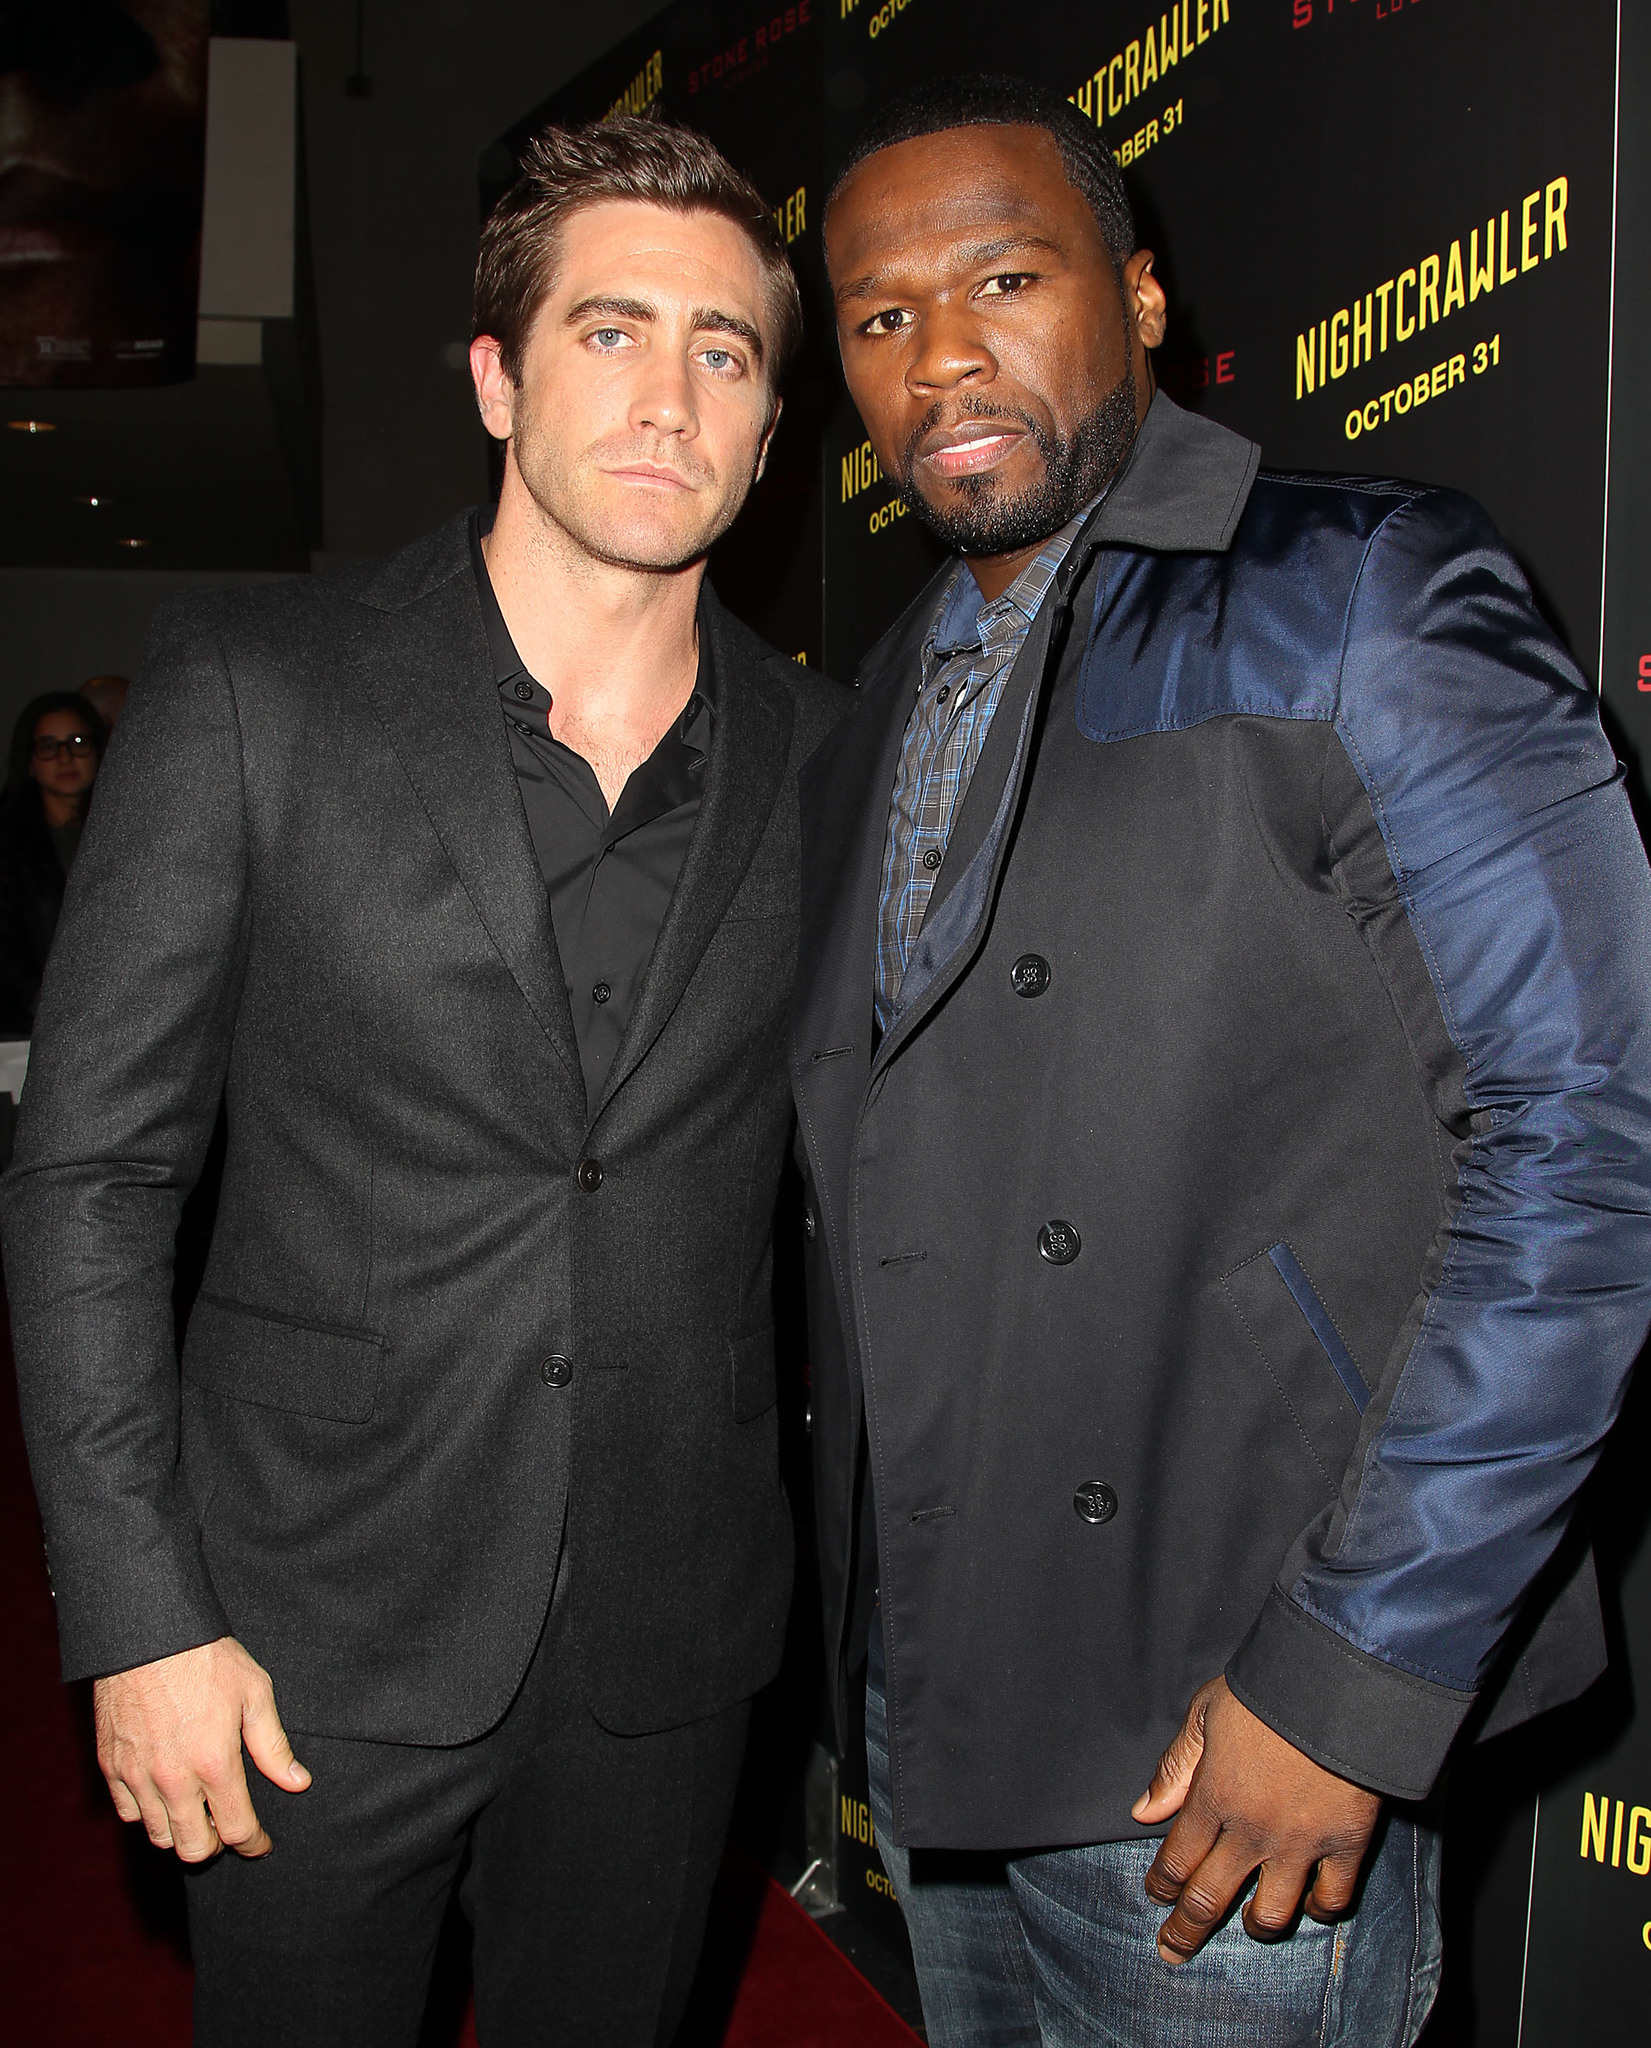 Jake Gyllenhaal and 50 Cent at event of Nightcrawler (2014)